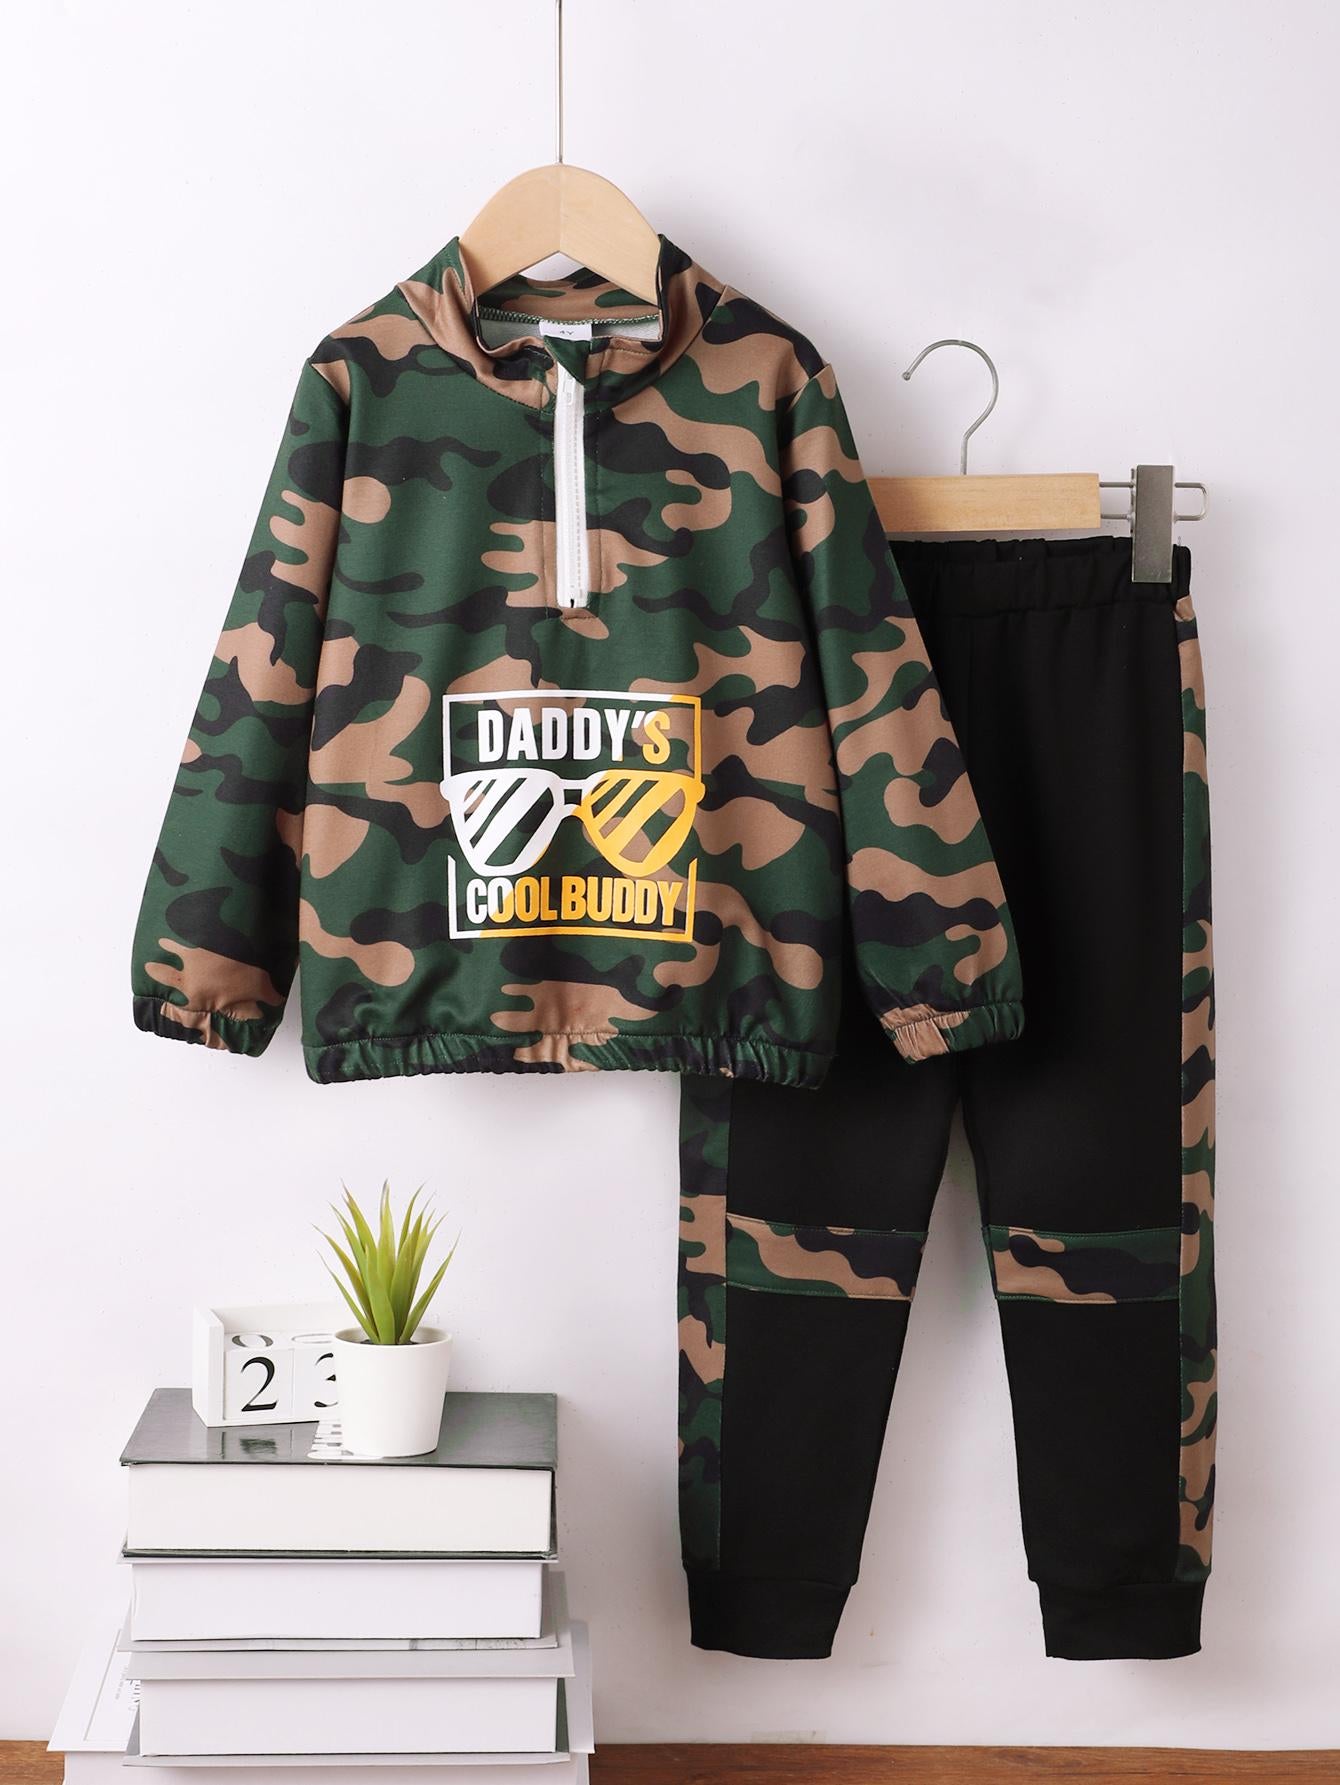 4-6Y Ready Stock Toddler Boys Fall Winter Clothes 4Y,5Y,6Y Kid Boys Pants Sets Letter Graphics Camouflage Print Zipper Pullover Tops Elastic Side Splicing Trousers 2Pcs Casual Clothing Green Catpapa 462311004